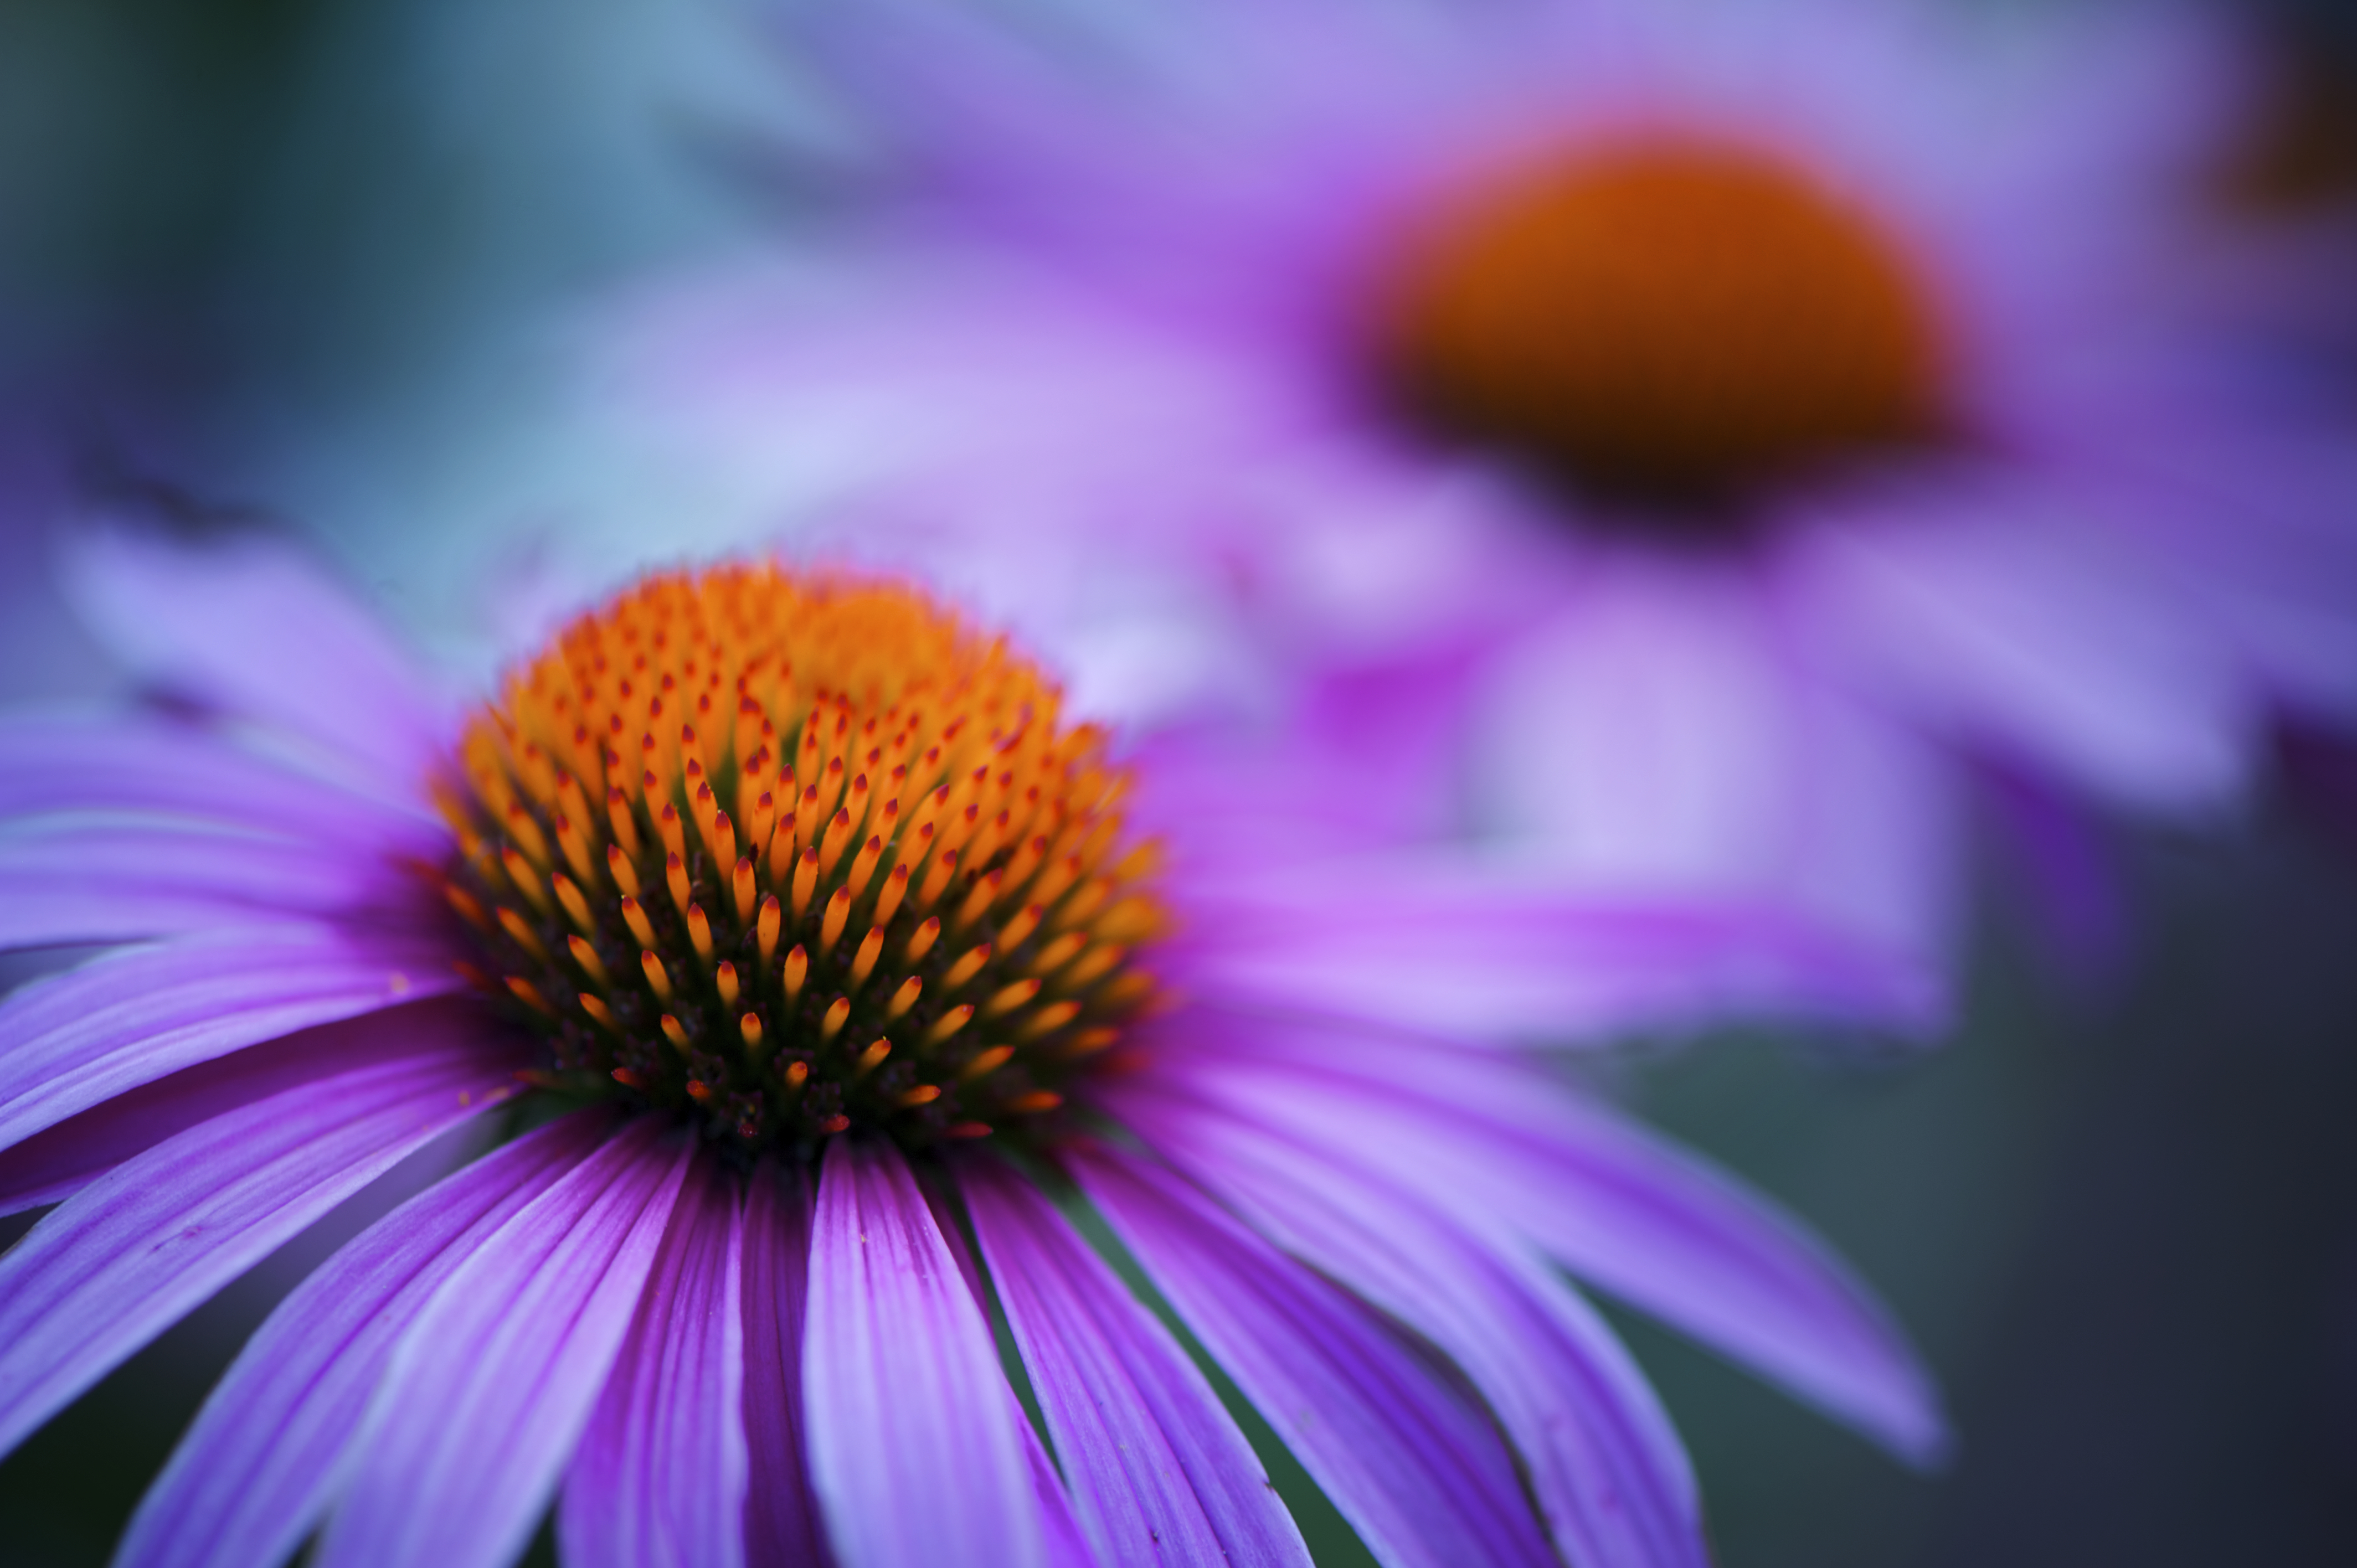 Two beautiful flower heads of the Echinacea plant to compare to the health benefits of Cannabis